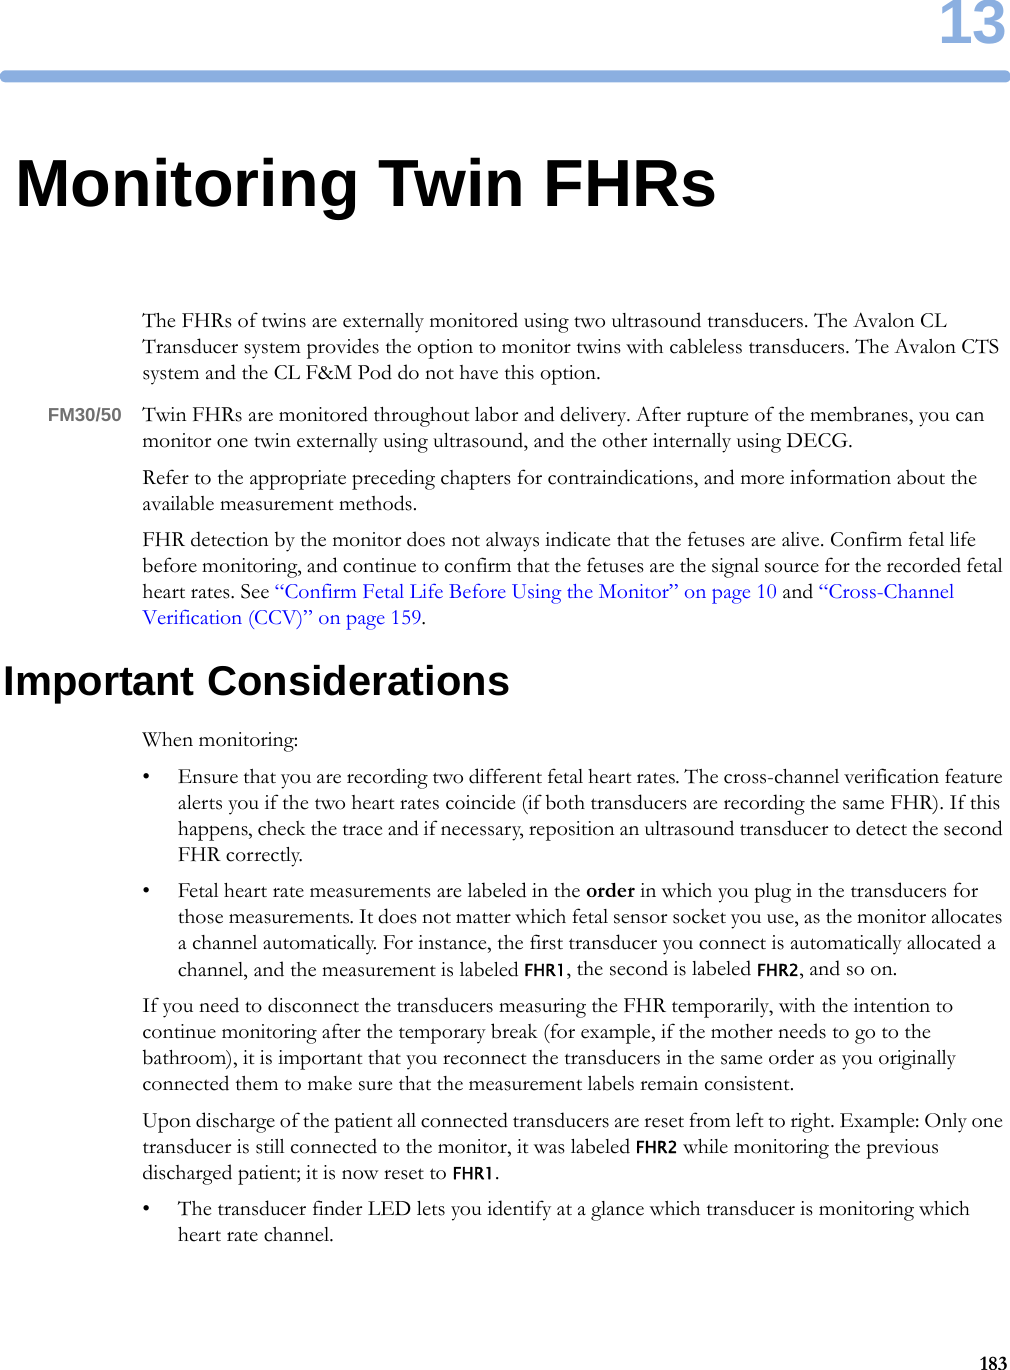 1318313Monitoring Twin FHRsThe FHRs of twins are externally monitored using two ultrasound transducers. The Avalon CL Transducer system provides the option to monitor twins with cableless transducers. The Avalon CTS system and the CL F&amp;M Pod do not have this option.FM30/50 Twin FHRs are monitored throughout labor and delivery. After rupture of the membranes, you can monitor one twin externally using ultrasound, and the other internally using DECG.Refer to the appropriate preceding chapters for contraindications, and more information about the available measurement methods.FHR detection by the monitor does not always indicate that the fetuses are alive. Confirm fetal life before monitoring, and continue to confirm that the fetuses are the signal source for the recorded fetal heart rates. See “Confirm Fetal Life Before Using the Monitor” on page 10 and “Cross-Channel Verification (CCV)” on page 159.Important ConsiderationsWhen monitoring:• Ensure that you are recording two different fetal heart rates. The cross-channel verification feature alerts you if the two heart rates coincide (if both transducers are recording the same FHR). If this happens, check the trace and if necessary, reposition an ultrasound transducer to detect the second FHR correctly.• Fetal heart rate measurements are labeled in the order in which you plug in the transducers for those measurements. It does not matter which fetal sensor socket you use, as the monitor allocates a channel automatically. For instance, the first transducer you connect is automatically allocated a channel, and the measurement is labeled FHR1, the second is labeled FHR2, and so on.If you need to disconnect the transducers measuring the FHR temporarily, with the intention to continue monitoring after the temporary break (for example, if the mother needs to go to the bathroom), it is important that you reconnect the transducers in the same order as you originally connected them to make sure that the measurement labels remain consistent.Upon discharge of the patient all connected transducers are reset from left to right. Example: Only one transducer is still connected to the monitor, it was labeled FHR2 while monitoring the previous discharged patient; it is now reset to FHR1.• The transducer finder LED lets you identify at a glance which transducer is monitoring which heart rate channel.